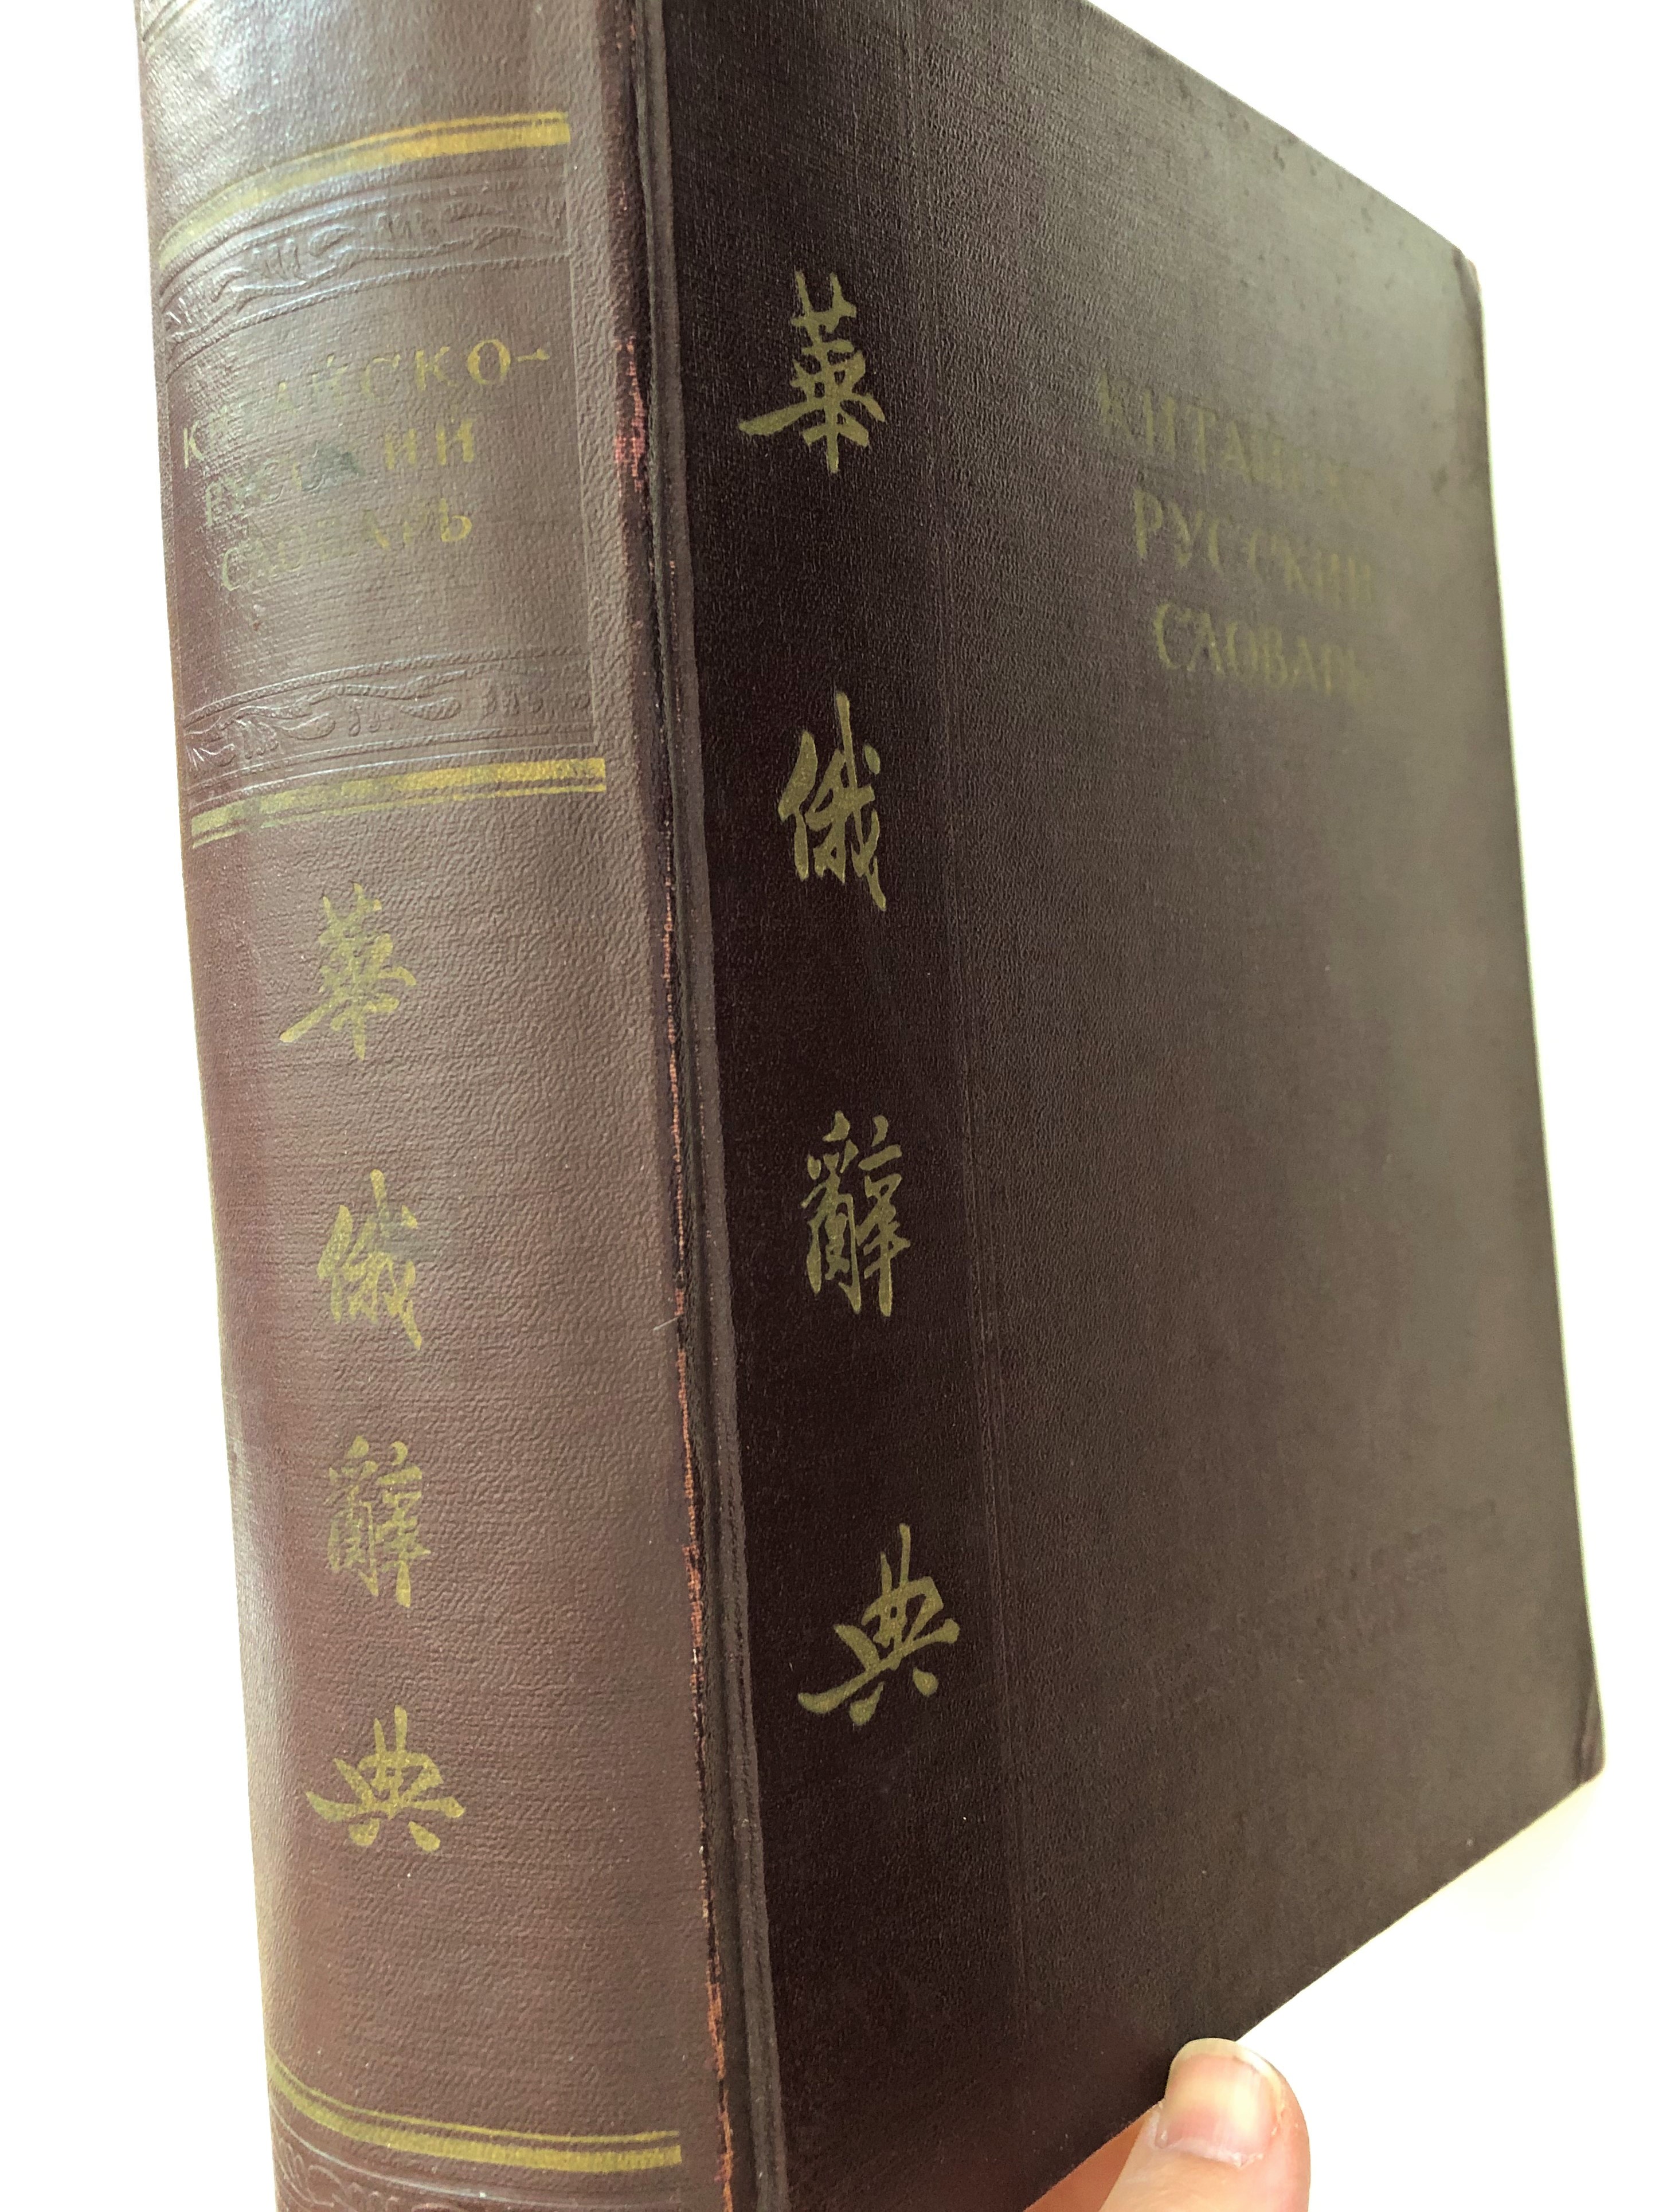 chinese-russian-dictionary-65.000-words-and-phrases-hardcover-1952-i.m-oshanin-4-.jpg